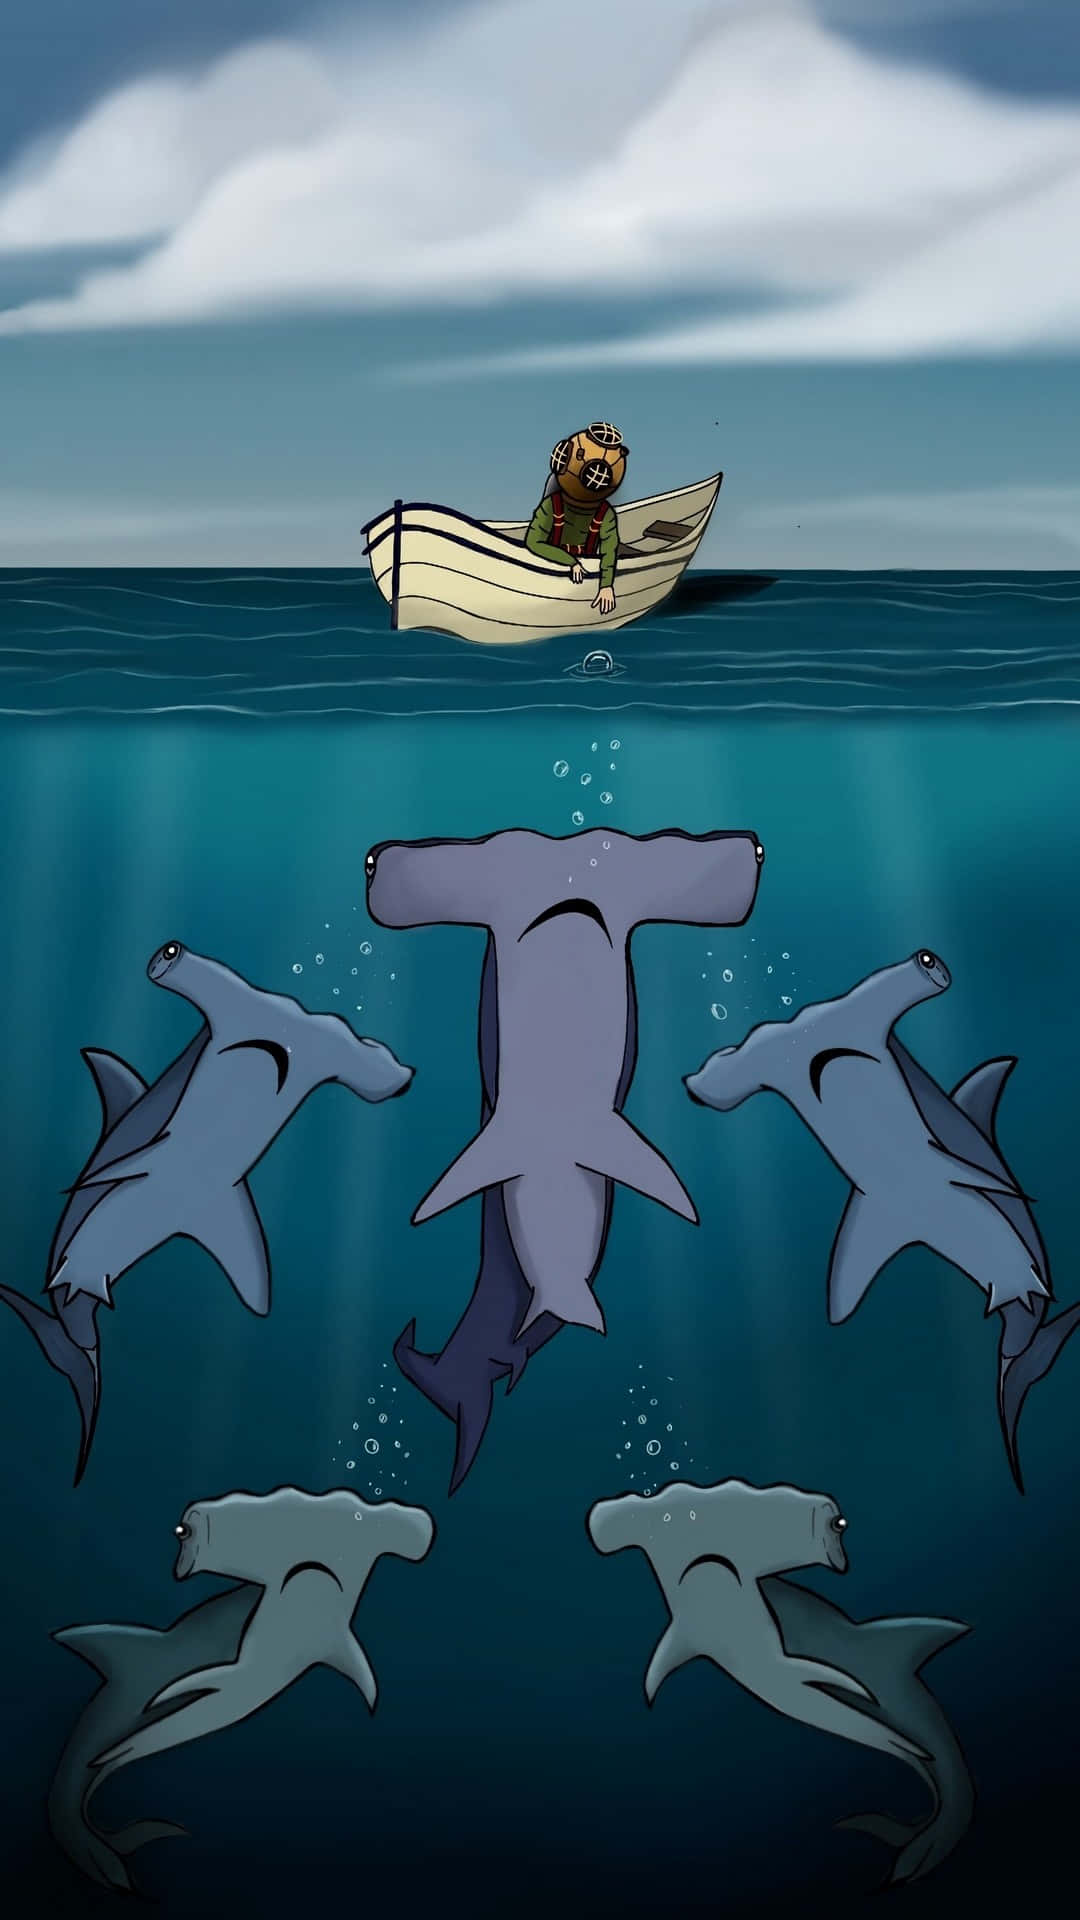 A Cartoon Of A Man In A Boat With Sharks Wallpaper